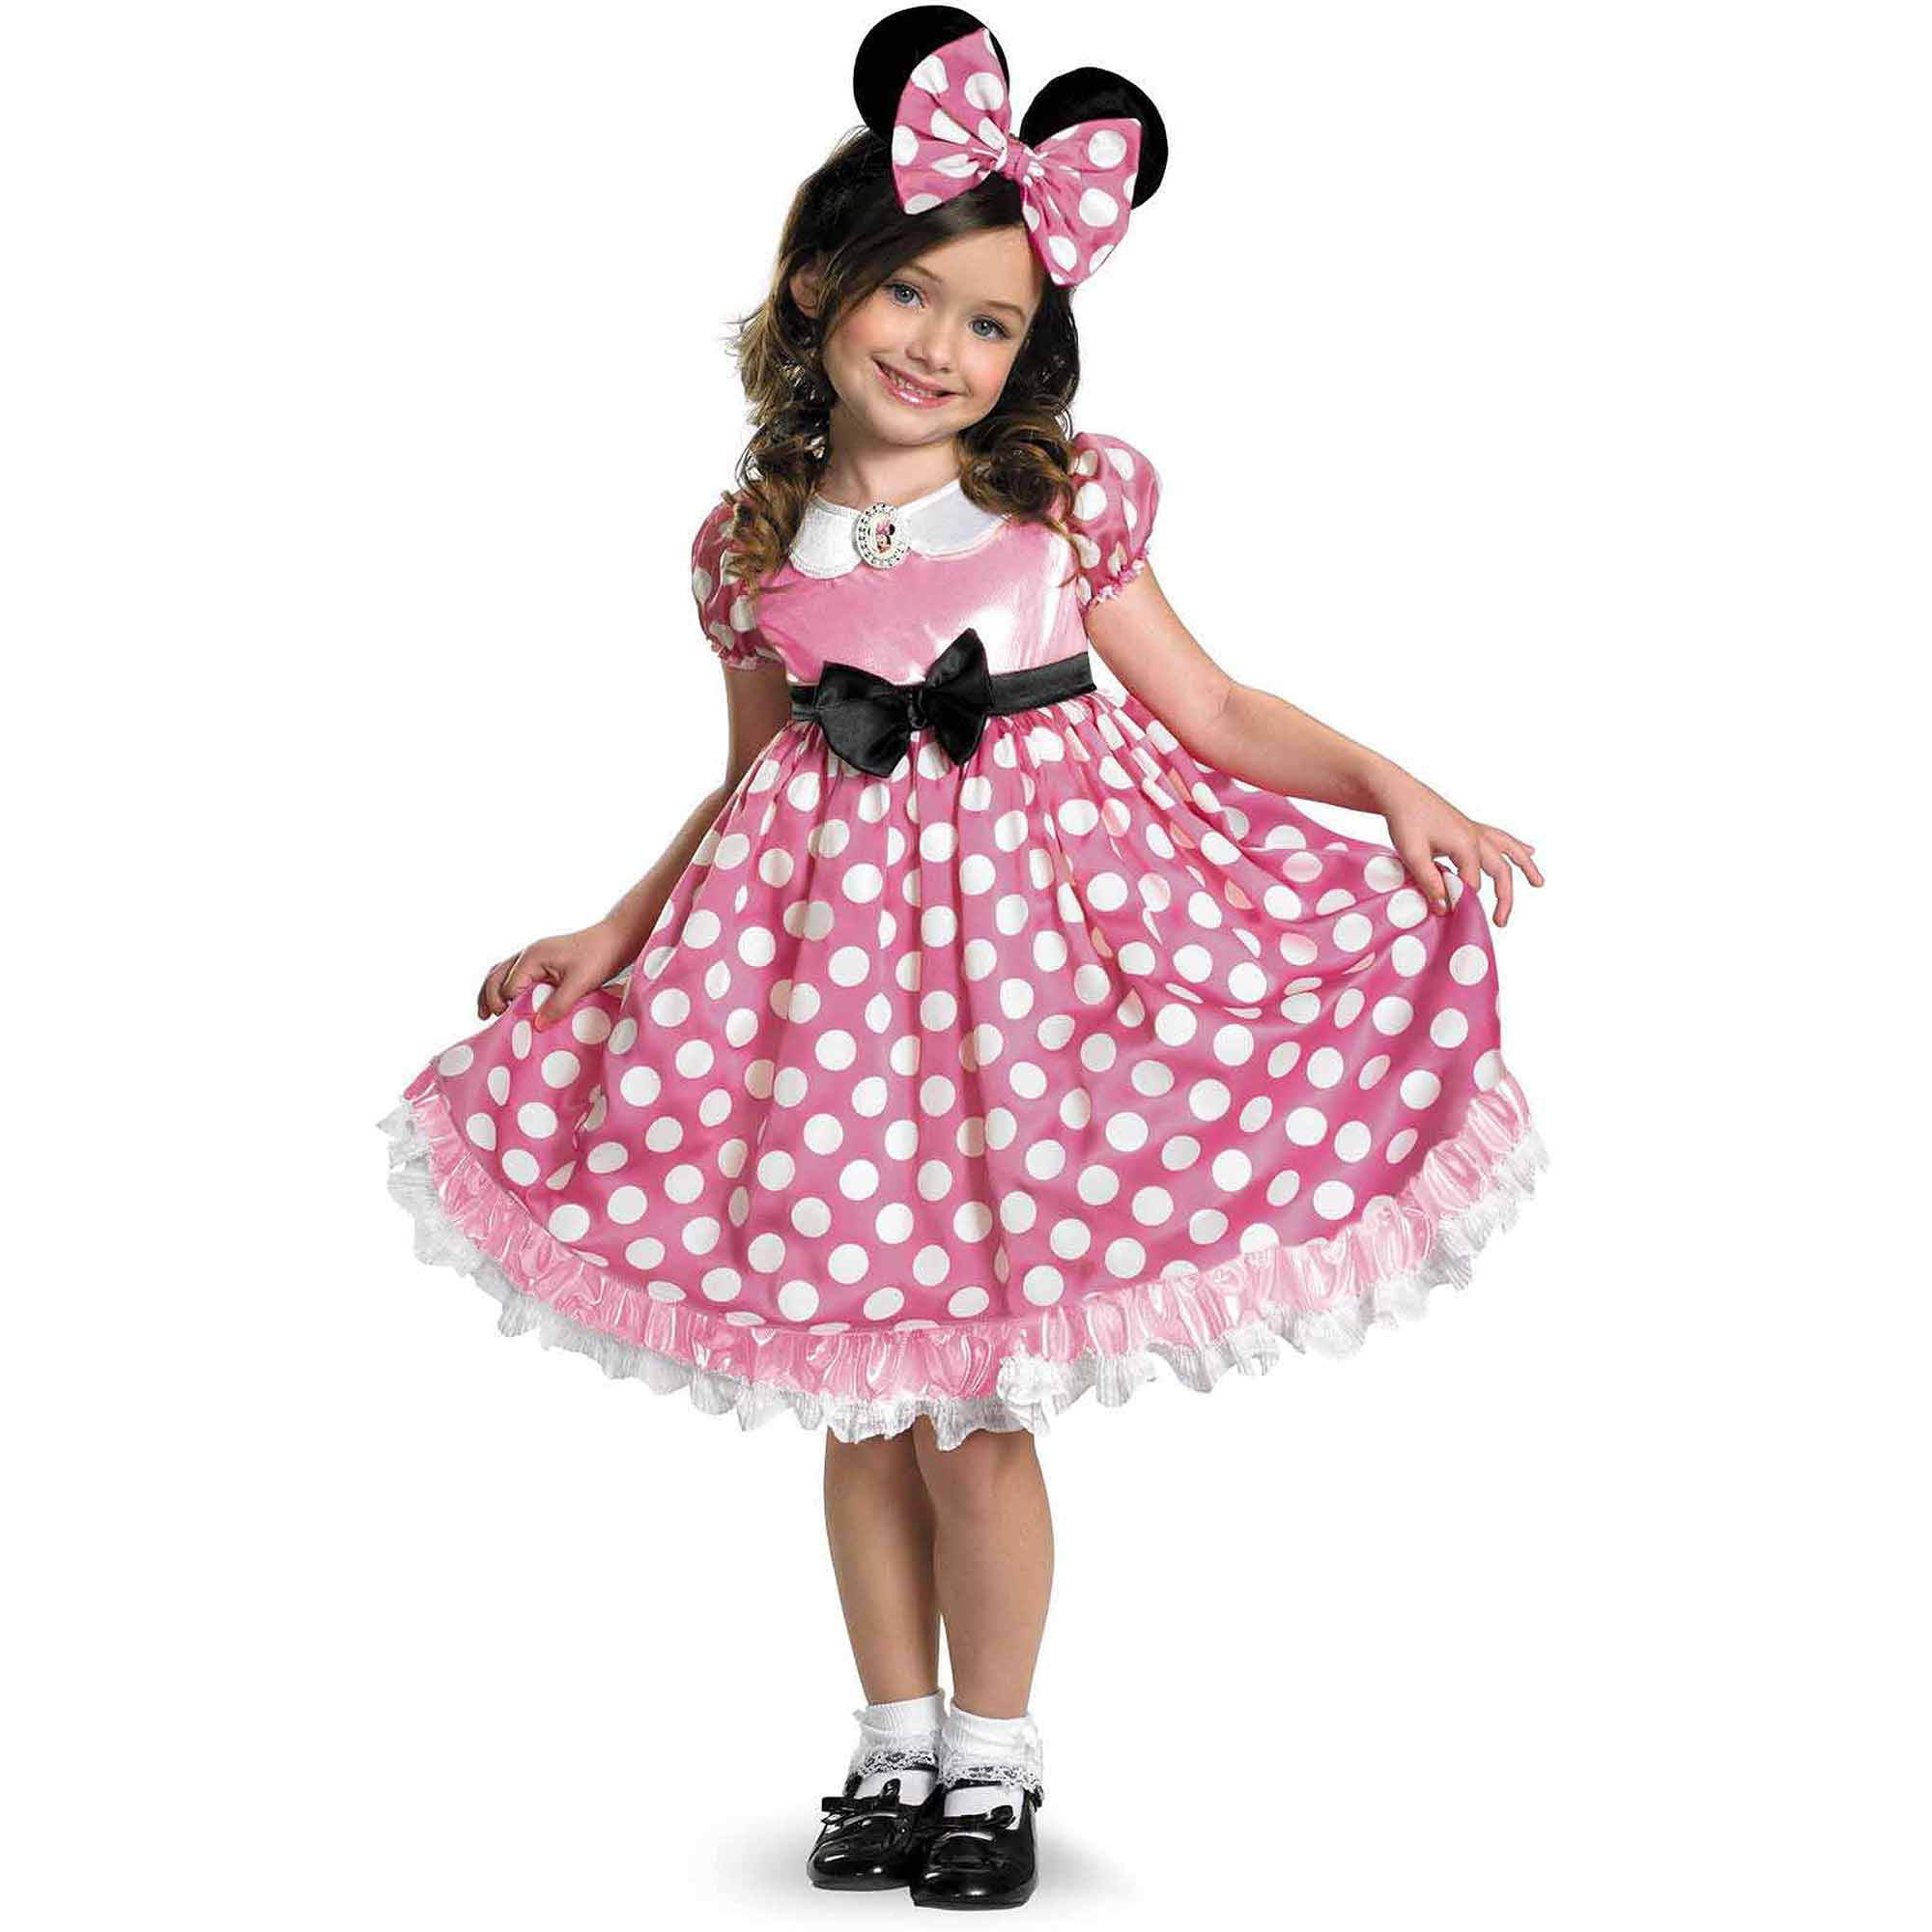 7th Avenue Costumes on Walmart Seller Reviews - Marketplace Rating